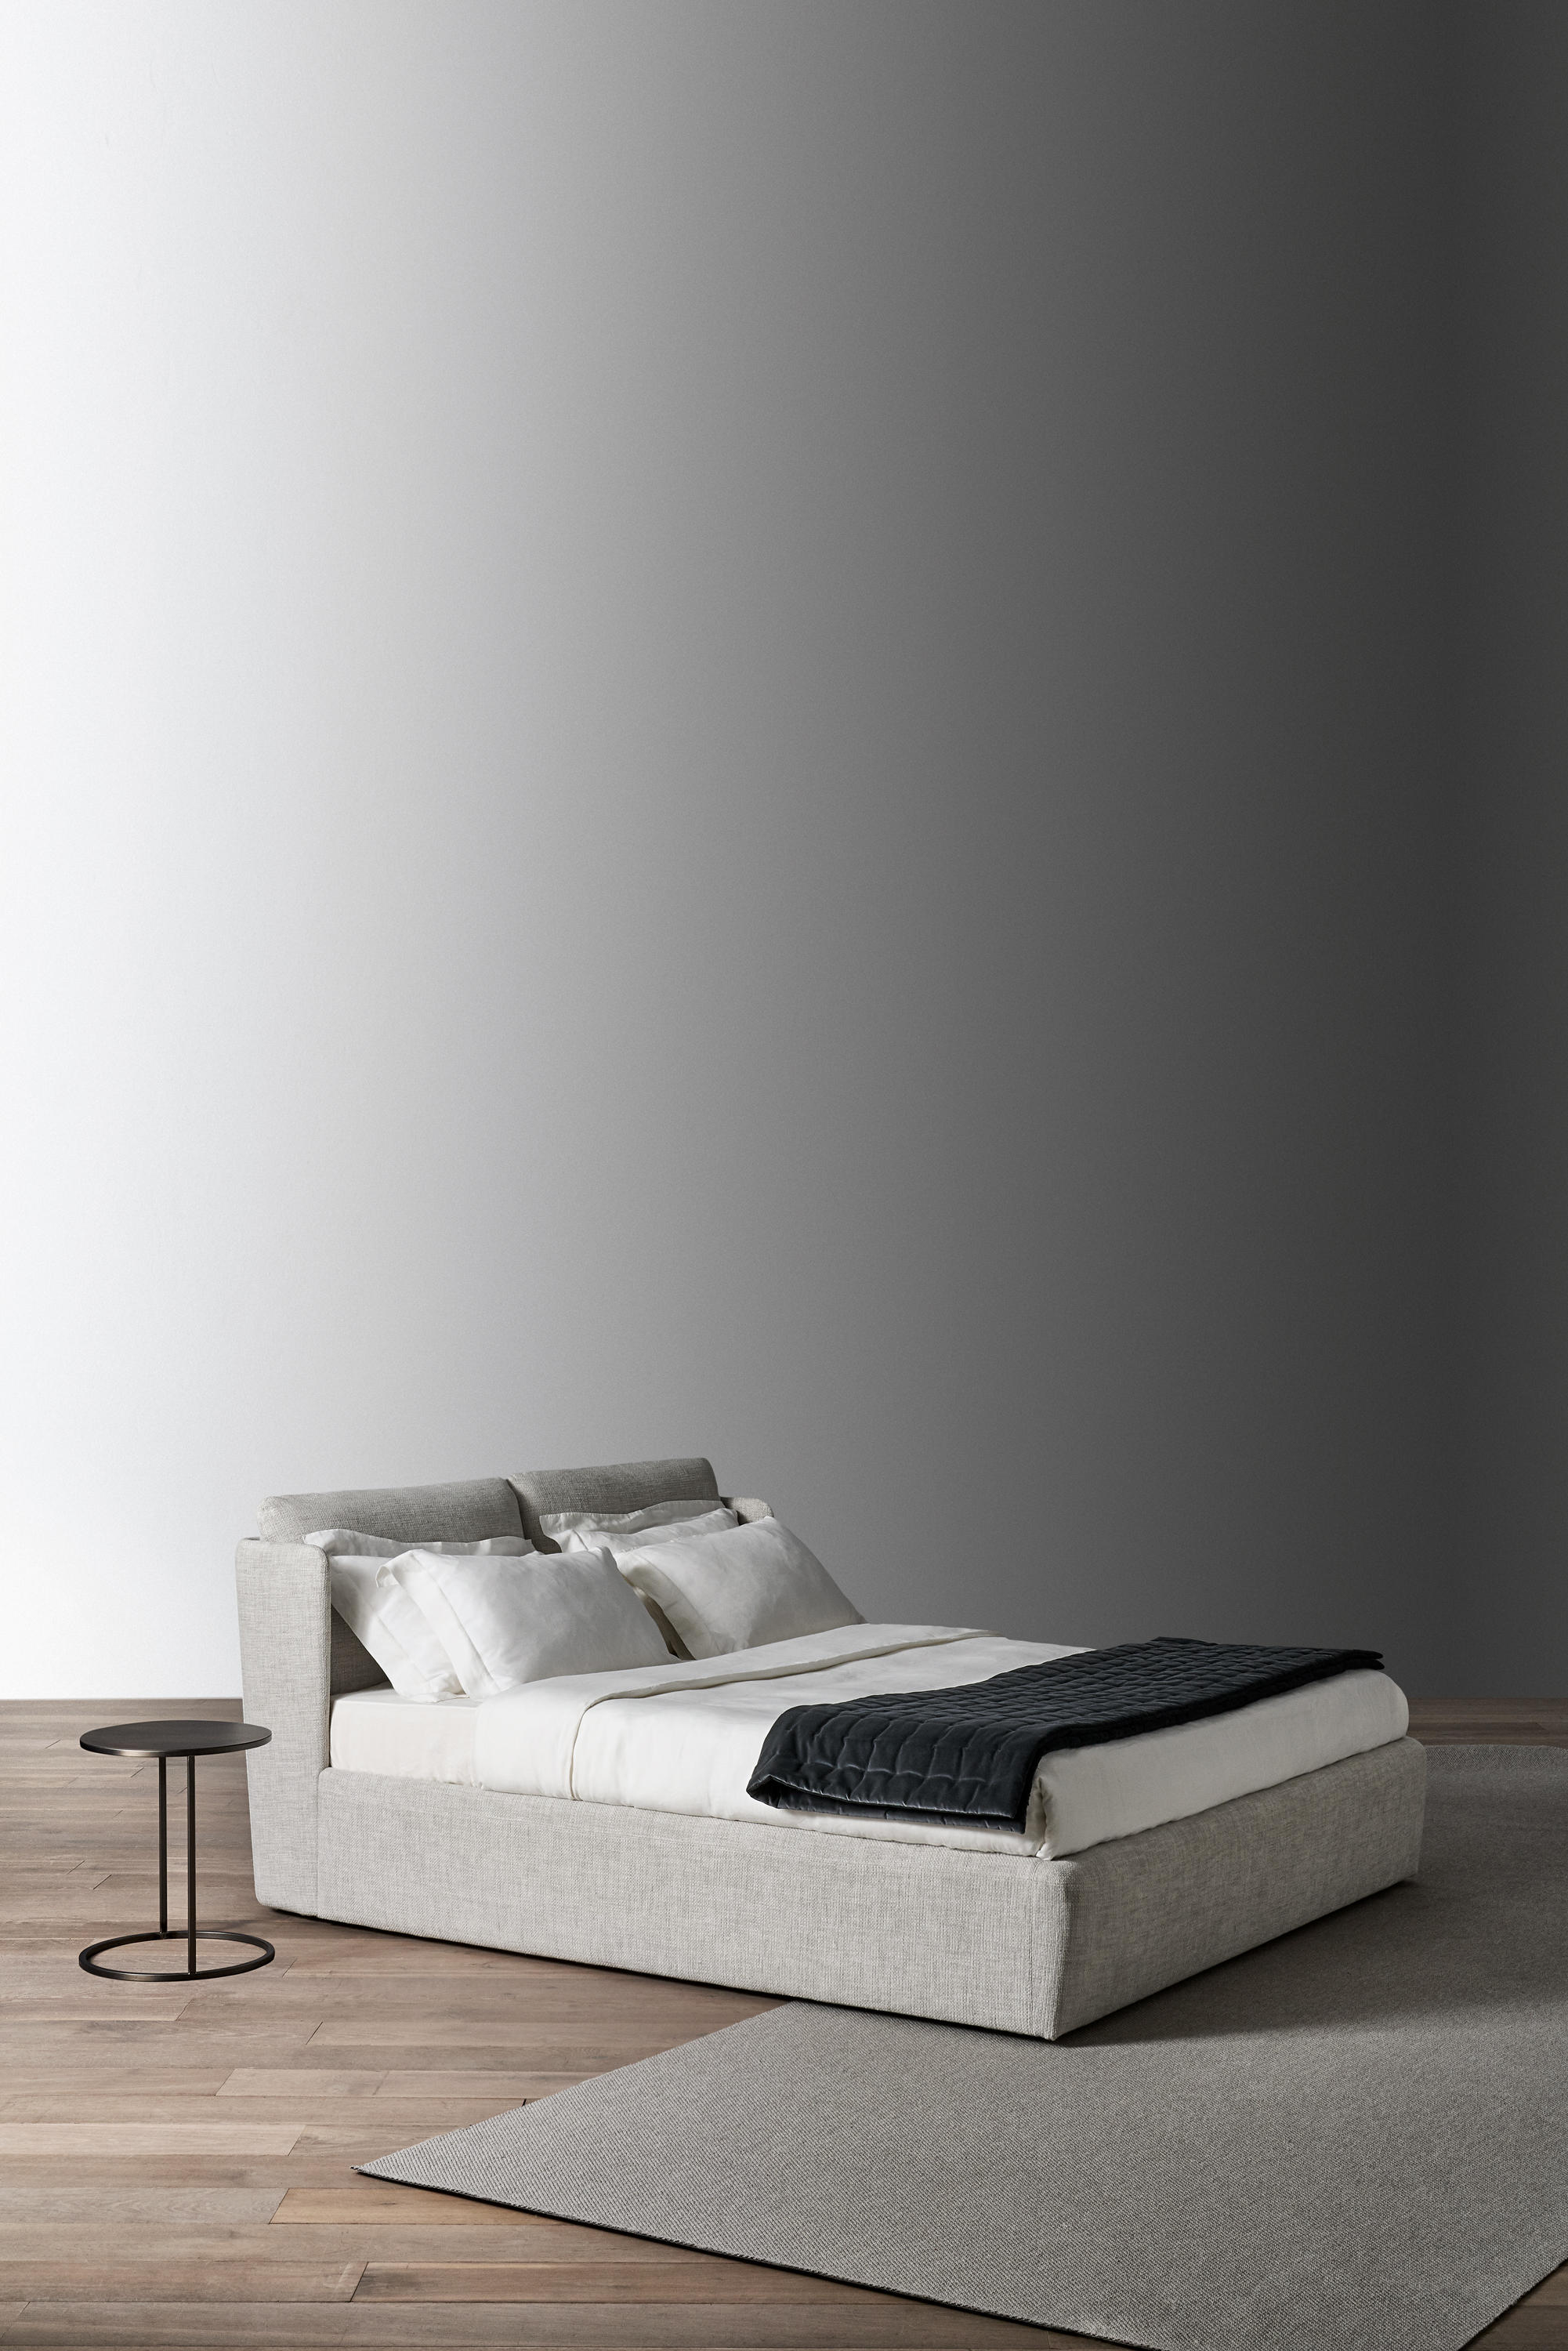 Kira Bed Beds From Meridiani Architonic